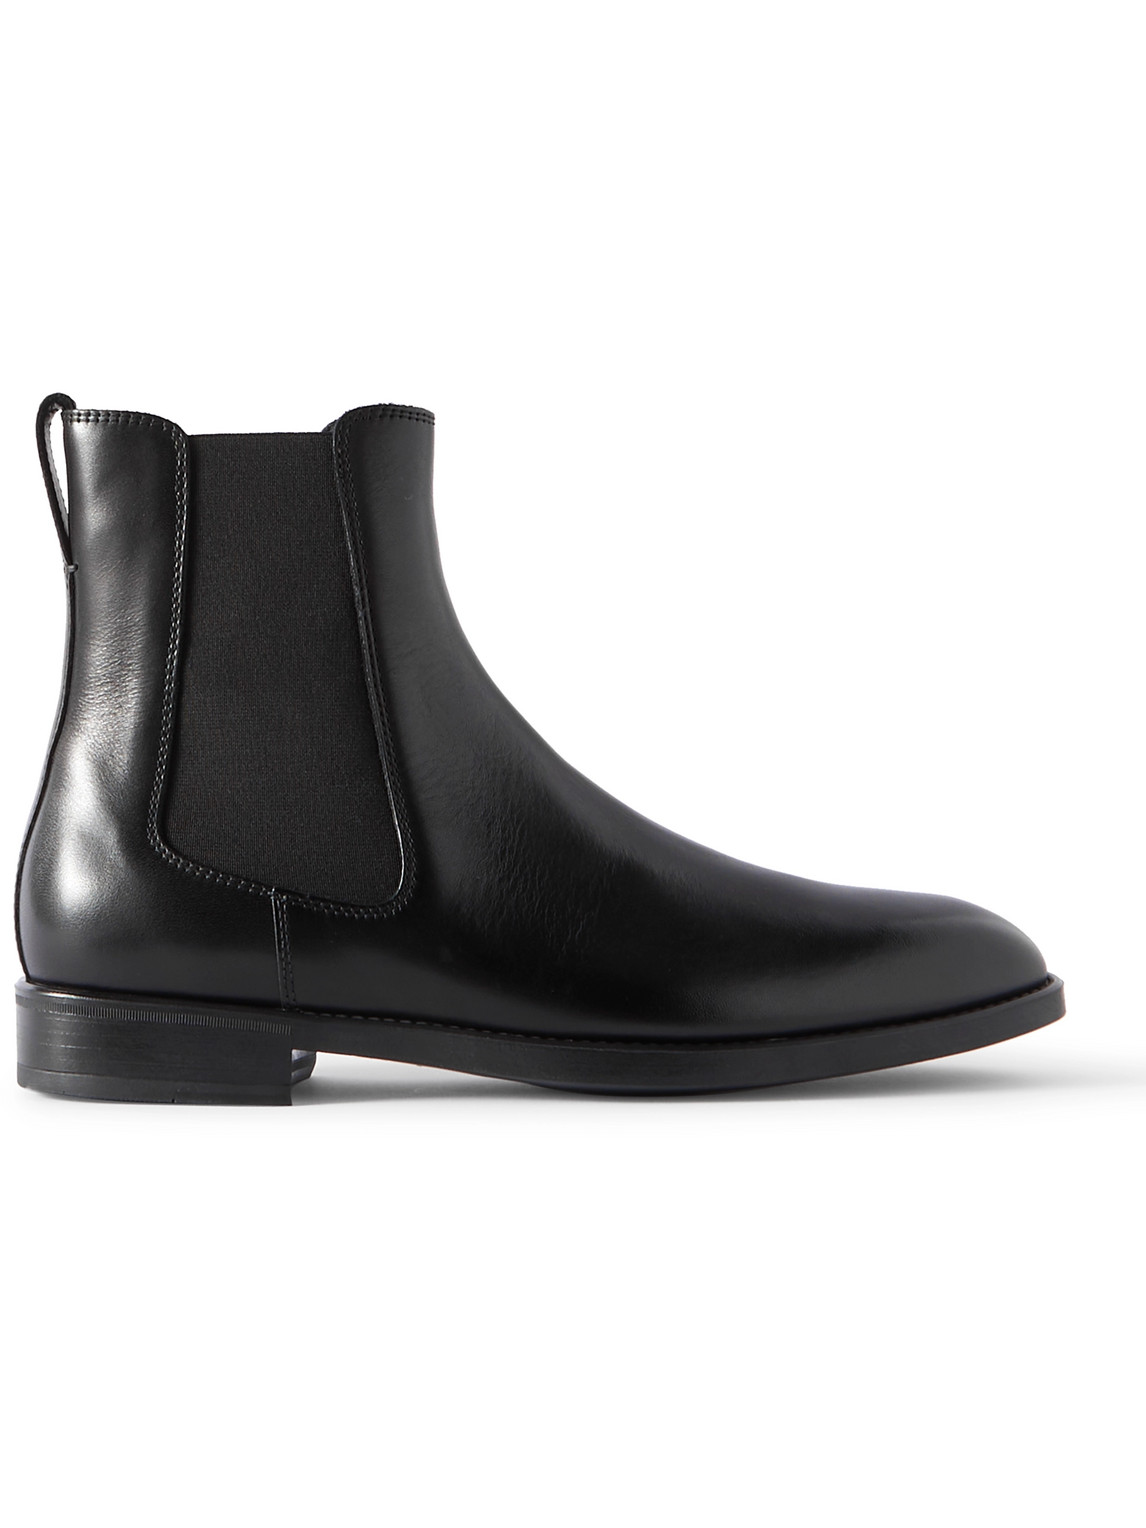 TOM FORD ROBERT POLISHED-LEATHER CHELSEA BOOTS